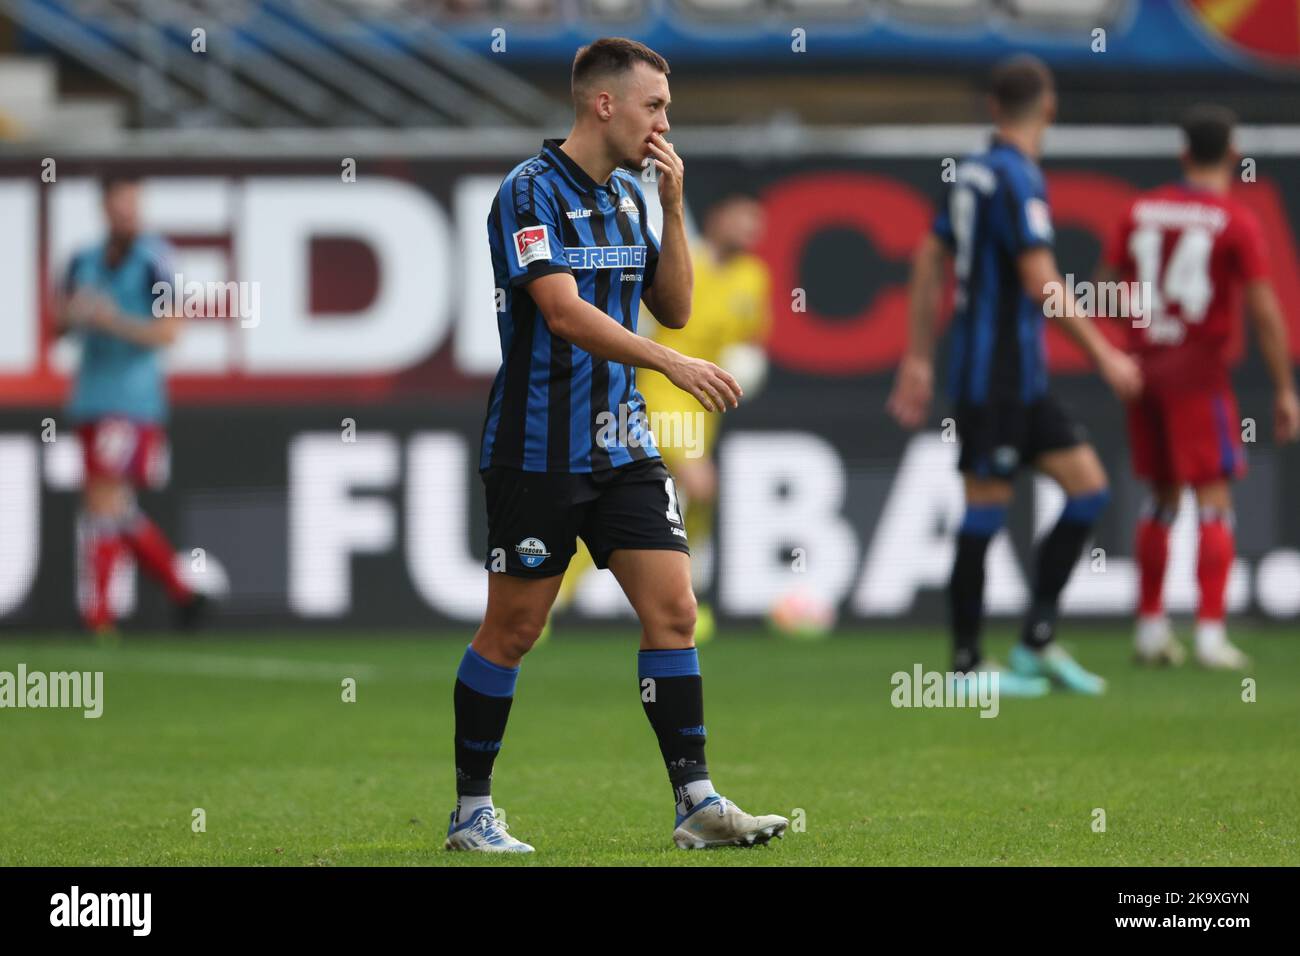 Paderborn, Germany. 30th Oct, 2022. Soccer: 2nd Bundesliga, SC Paderborn 07 - Hamburger SV, Matchday 14 at Home Deluxe Arena. Paderborn's Julian Justvan is disappointed. Credit: Friso Gentsch/dpa - IMPORTANT NOTE: In accordance with the requirements of the DFL Deutsche Fußball Liga and the DFB Deutscher Fußball-Bund, it is prohibited to use or have used photographs taken in the stadium and/or of the match in the form of sequence pictures and/or video-like photo series./dpa/Alamy Live News Stock Photo